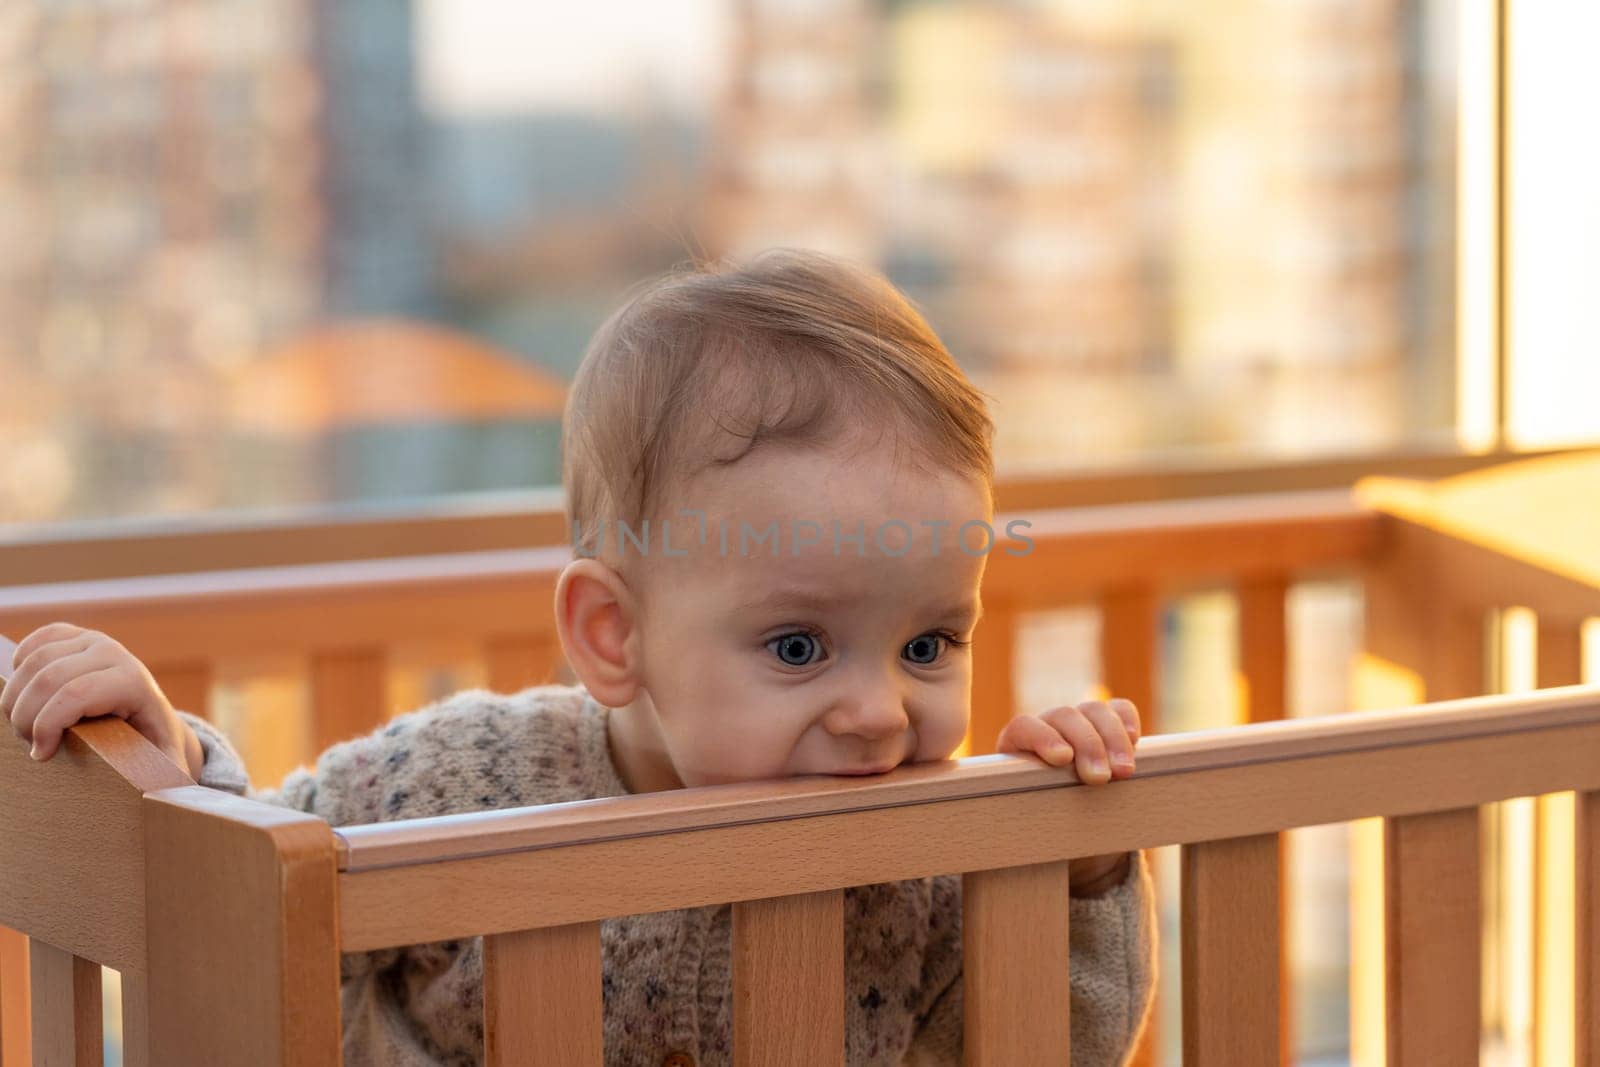 a little girl sadly gnaws the edge of her crib with her teeth while waiting for her parents.